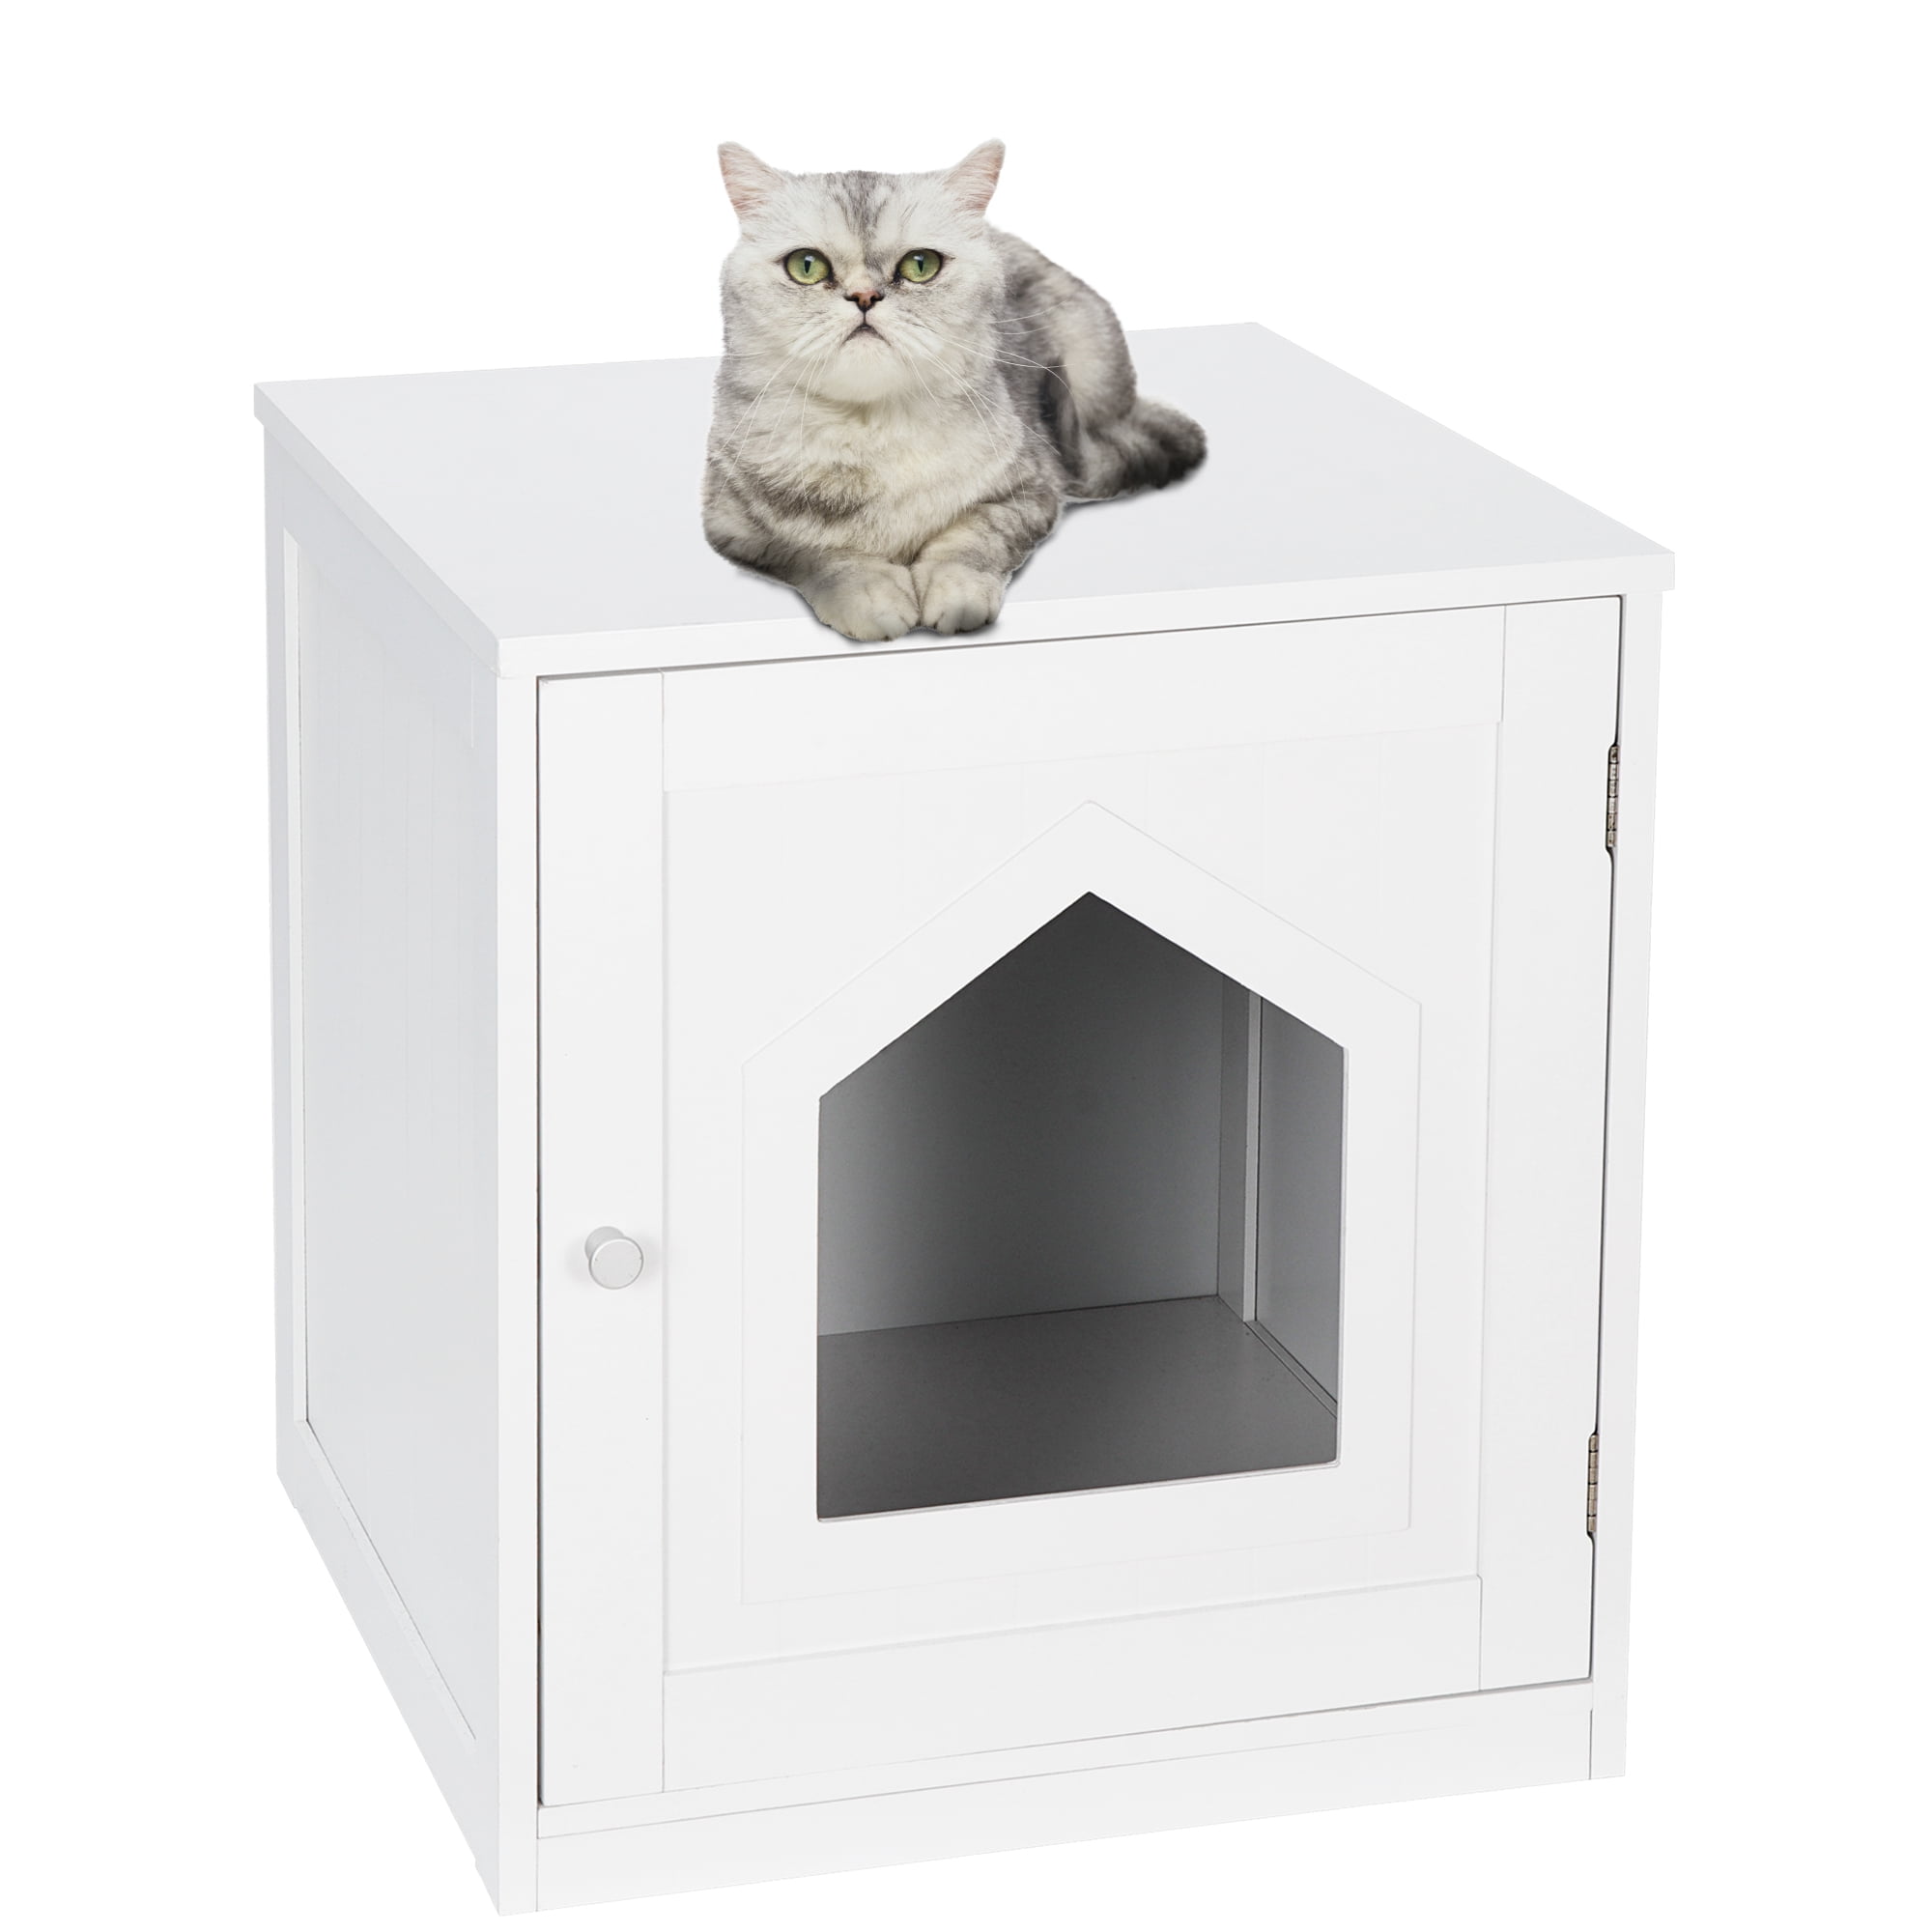 Decorative Cat House Side Table,Nightstand Pet House,Indoor Cat Home